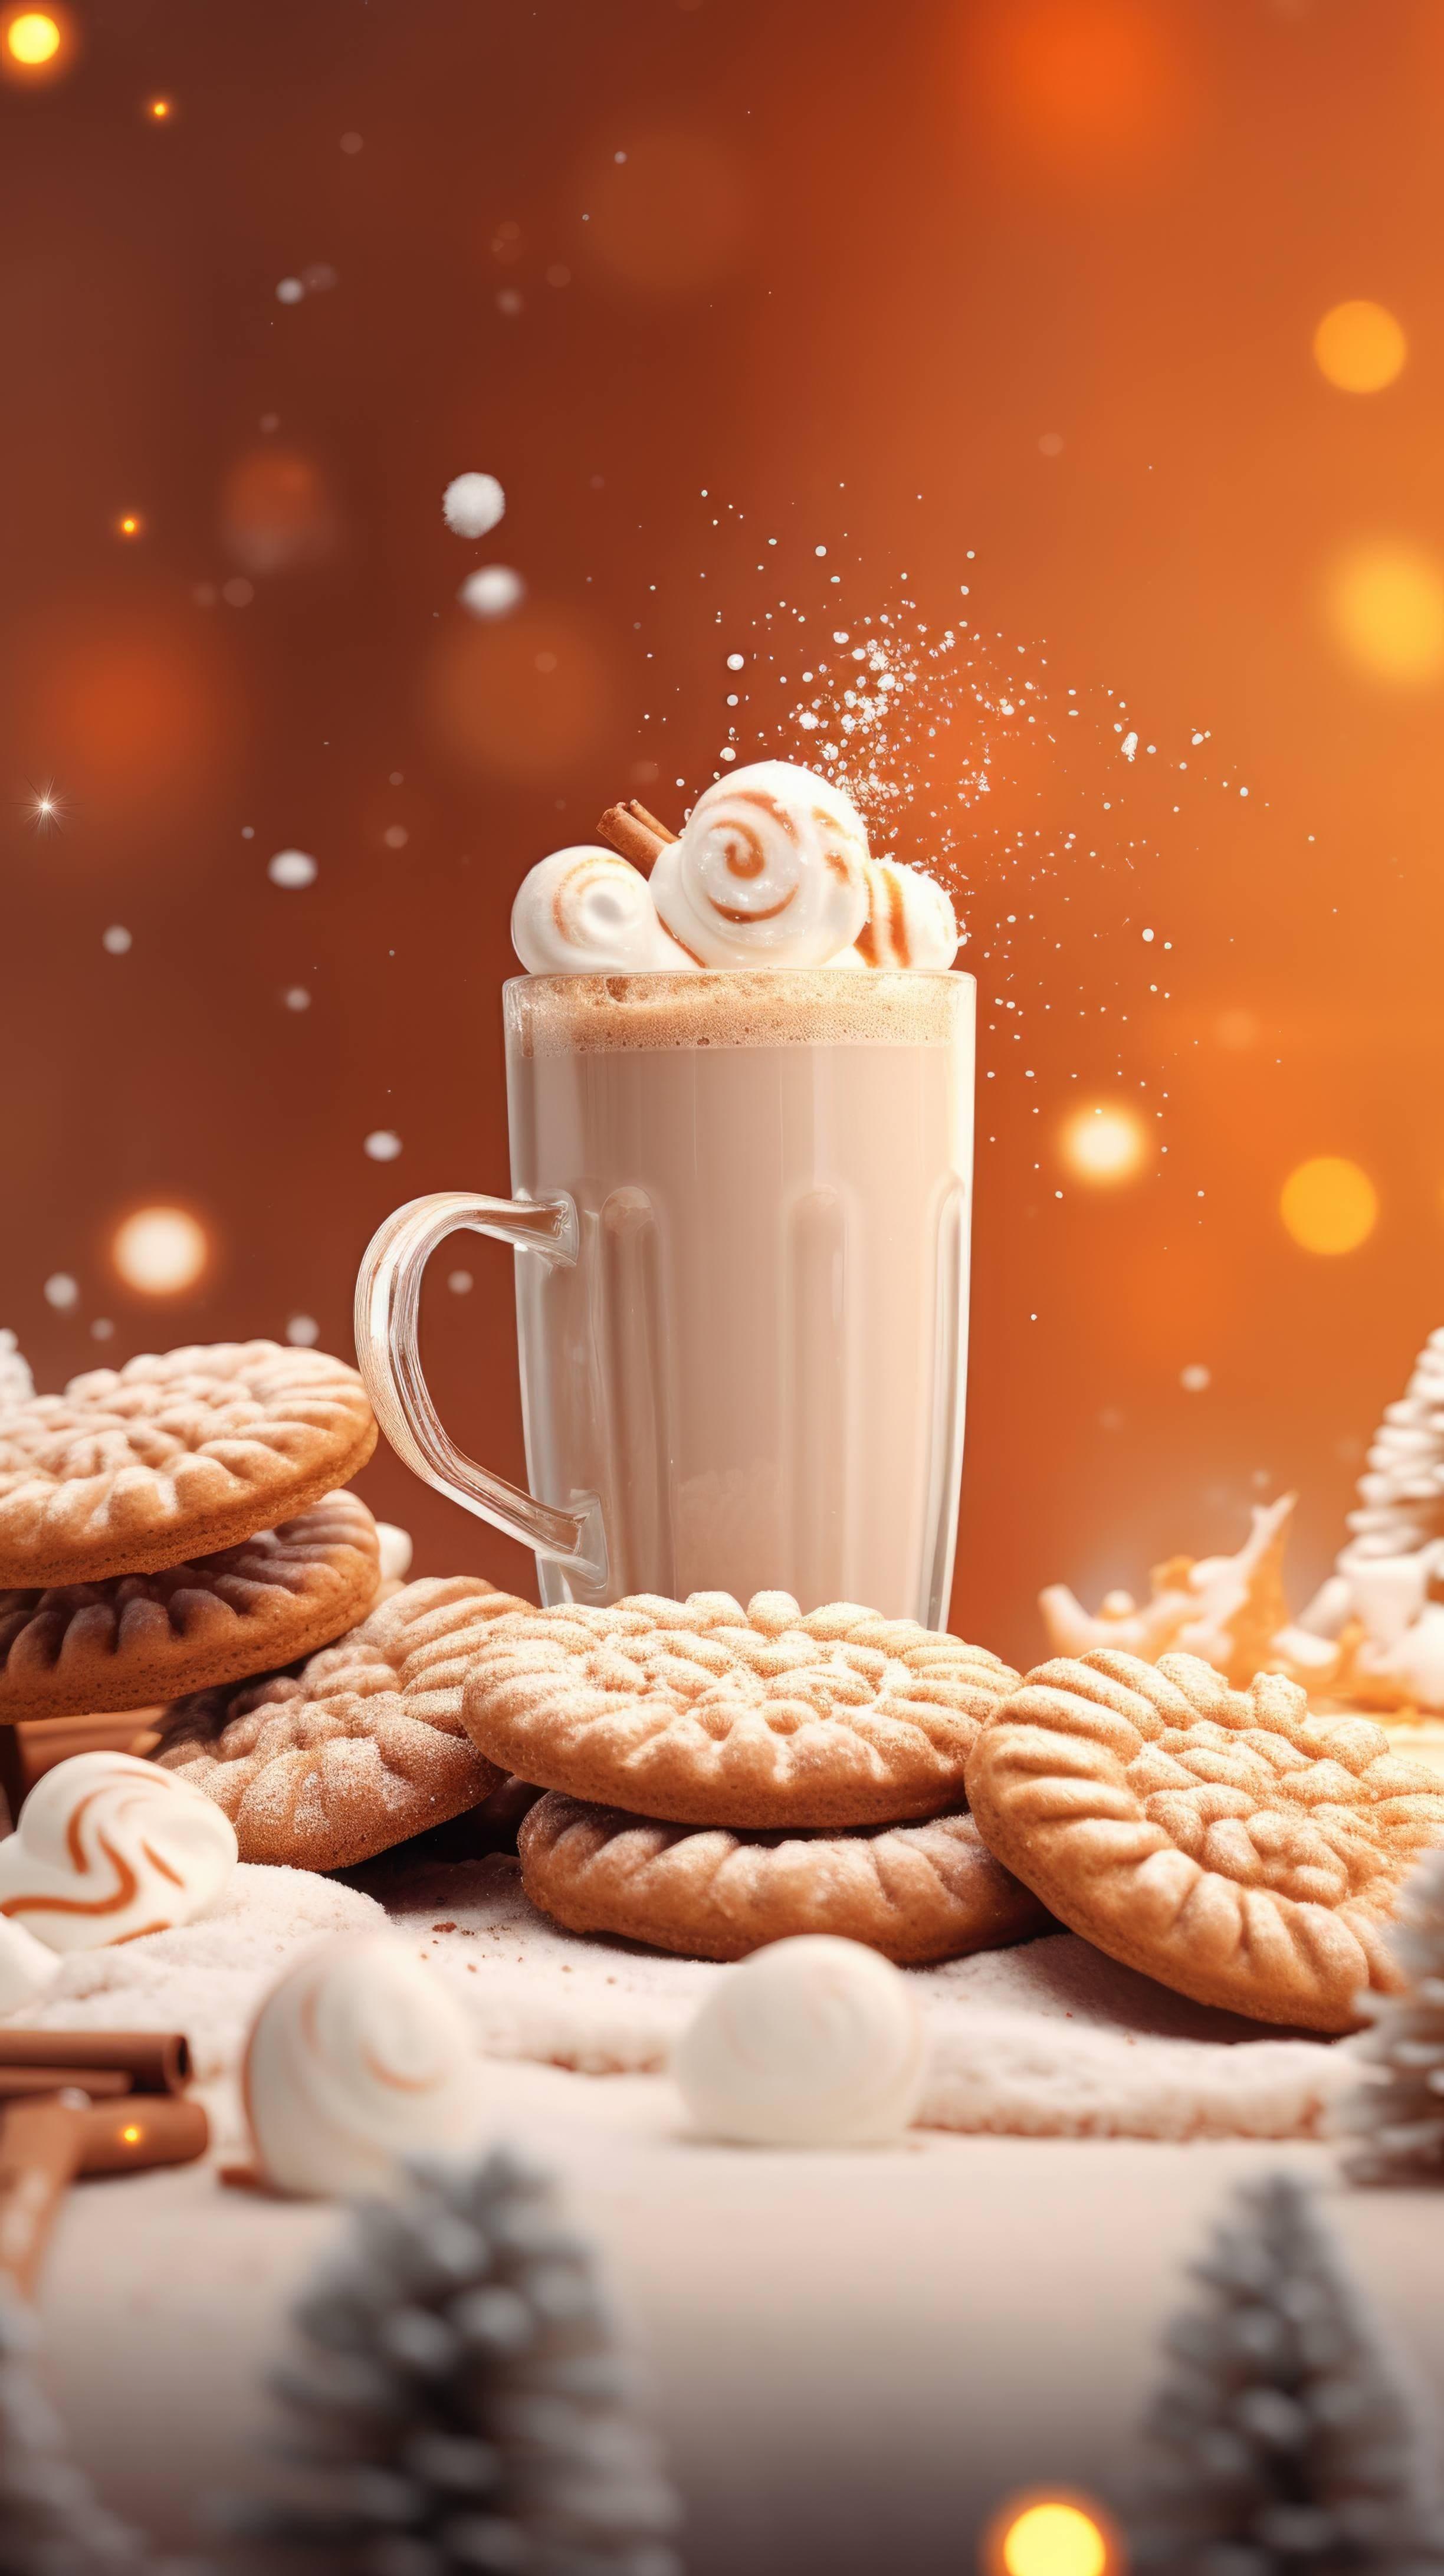 A Mobile Wallpaper Of Christmas Cookies And Hot Chocolate